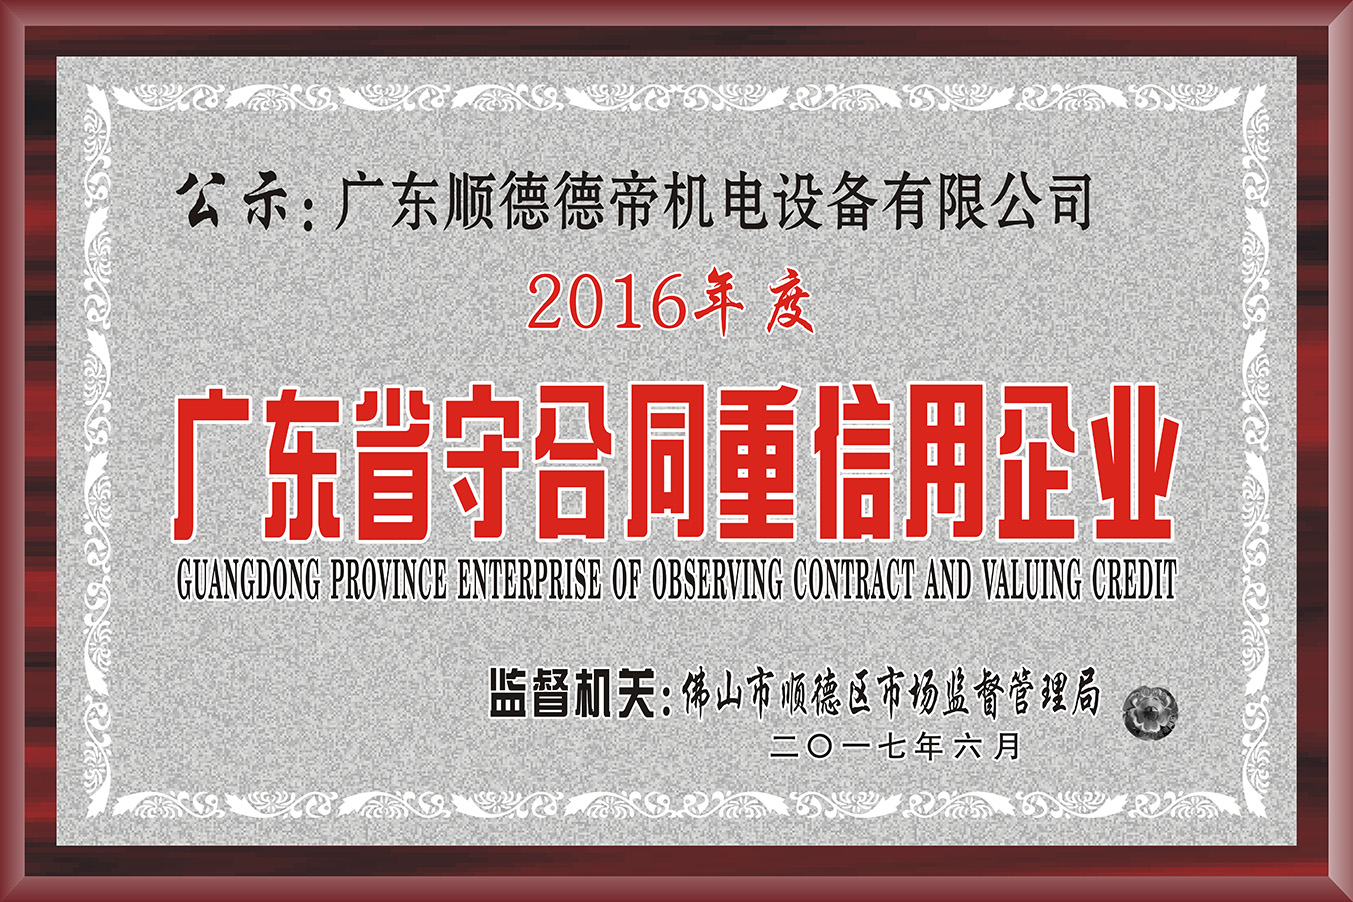 Contract abiding and trustworthy enterprise in Guangdong Province in 2016